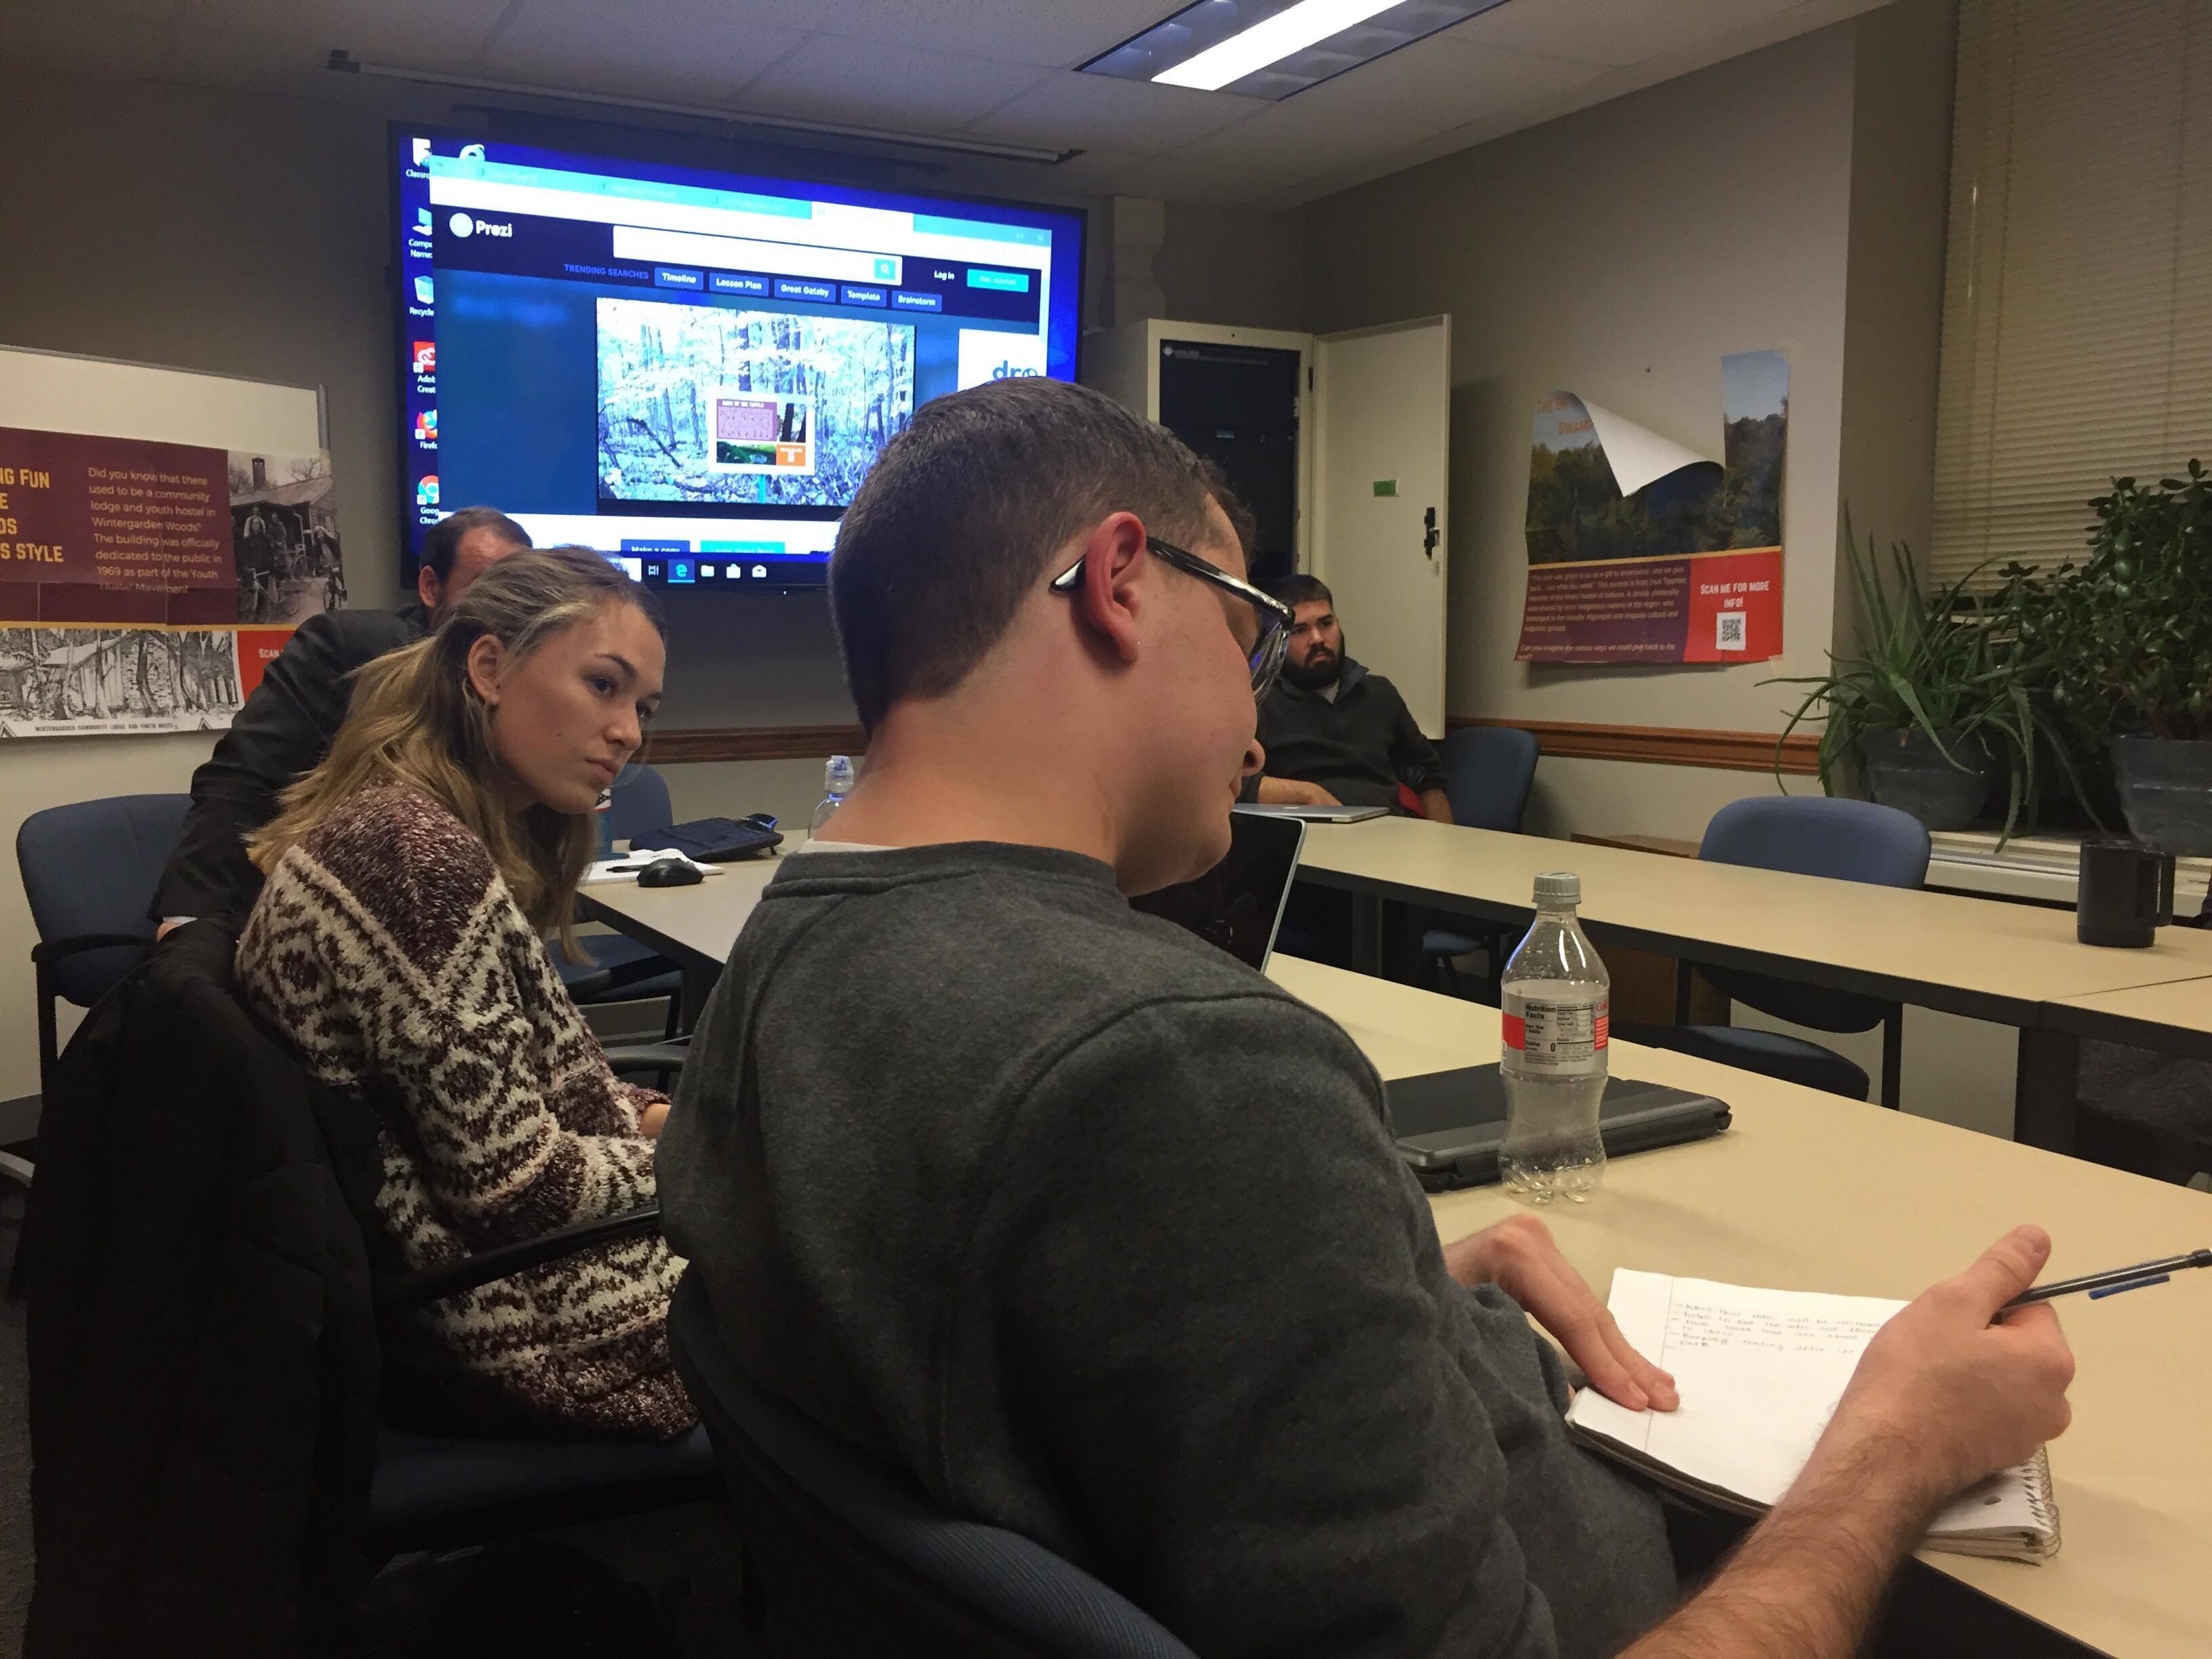 BGSU History students discuss critical approaches to analyzing the past through rigorous research, writing and discussion.